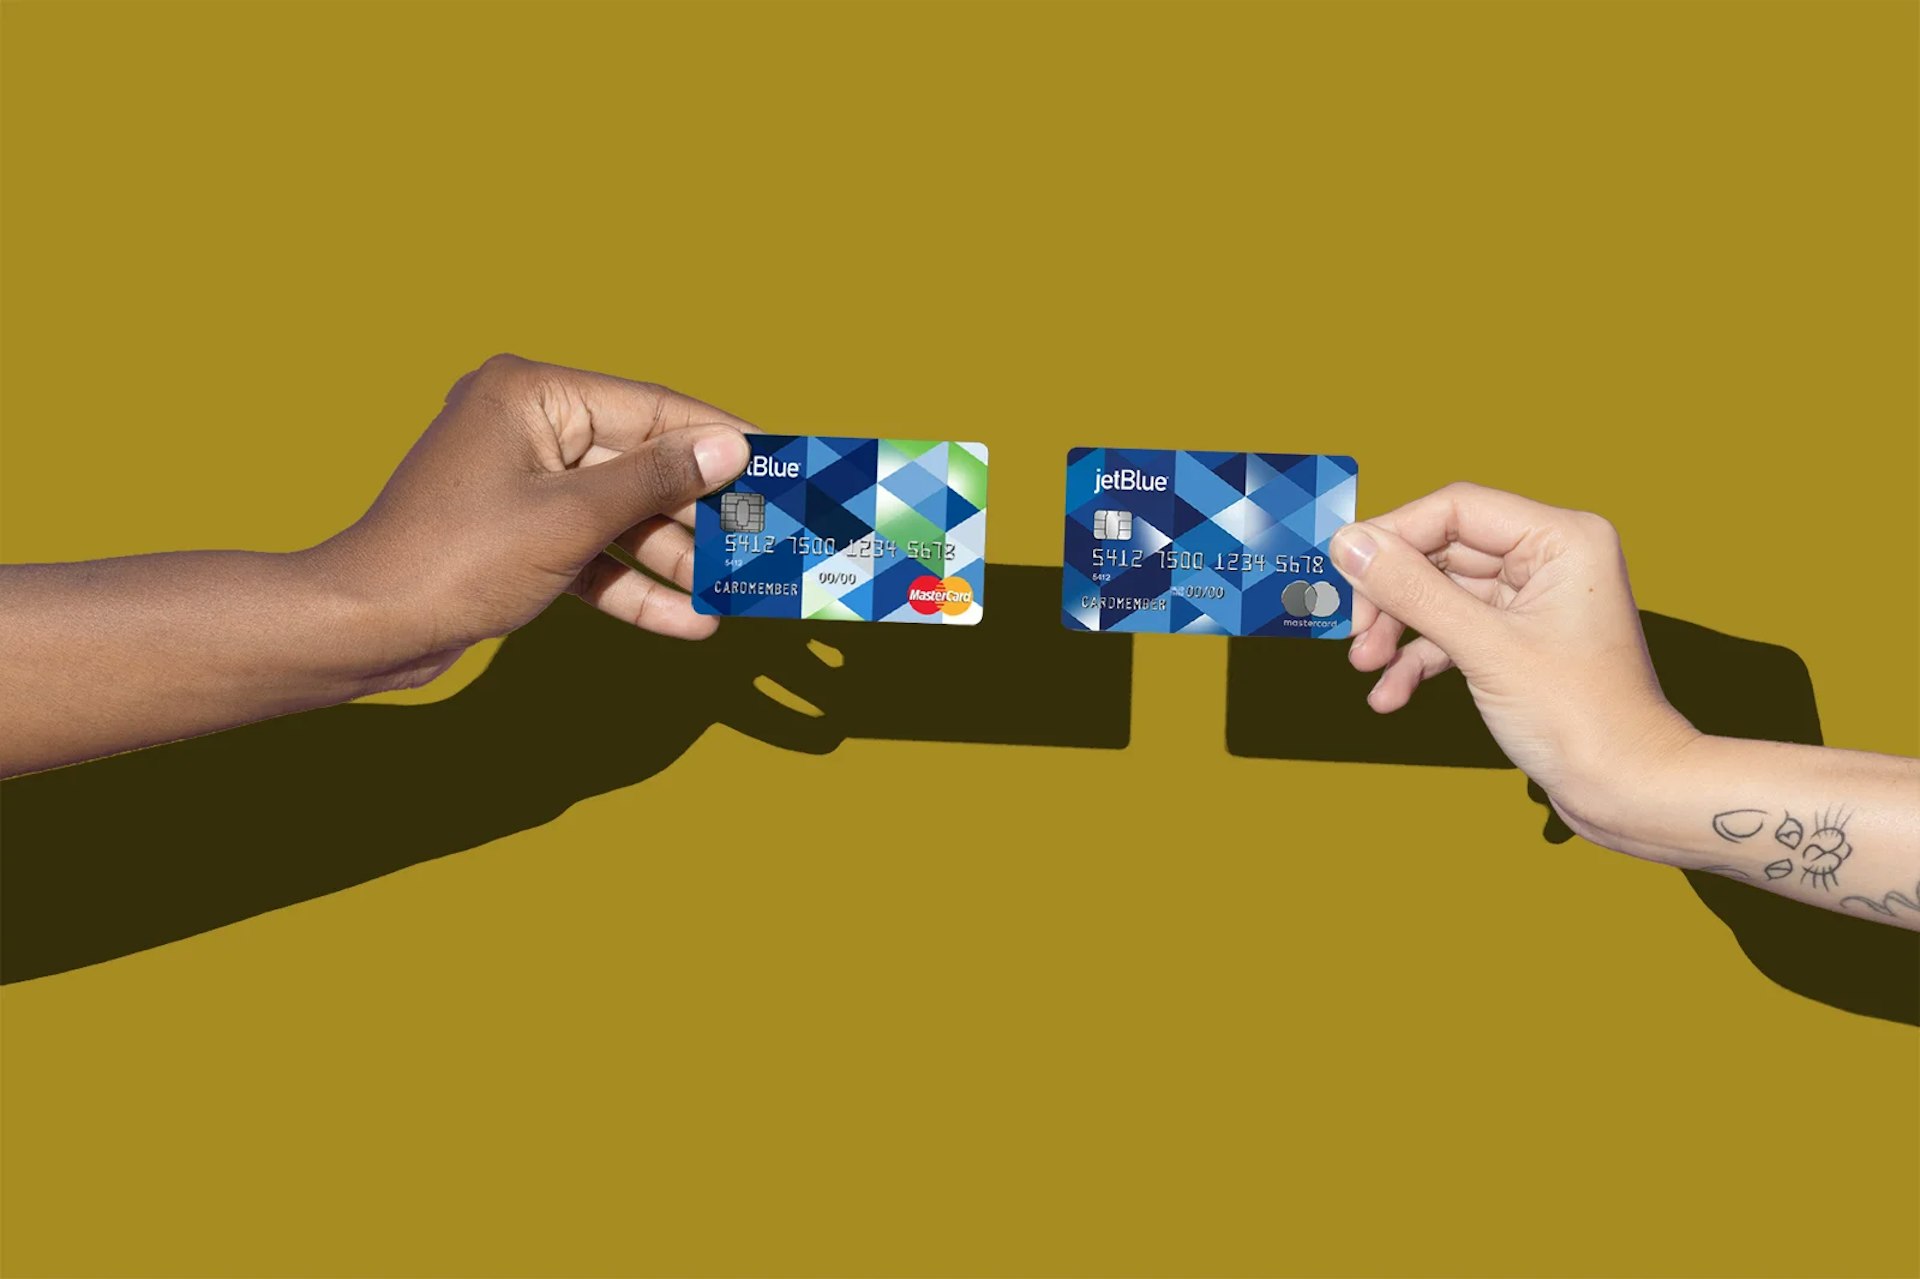 JetBlue's two credit cards